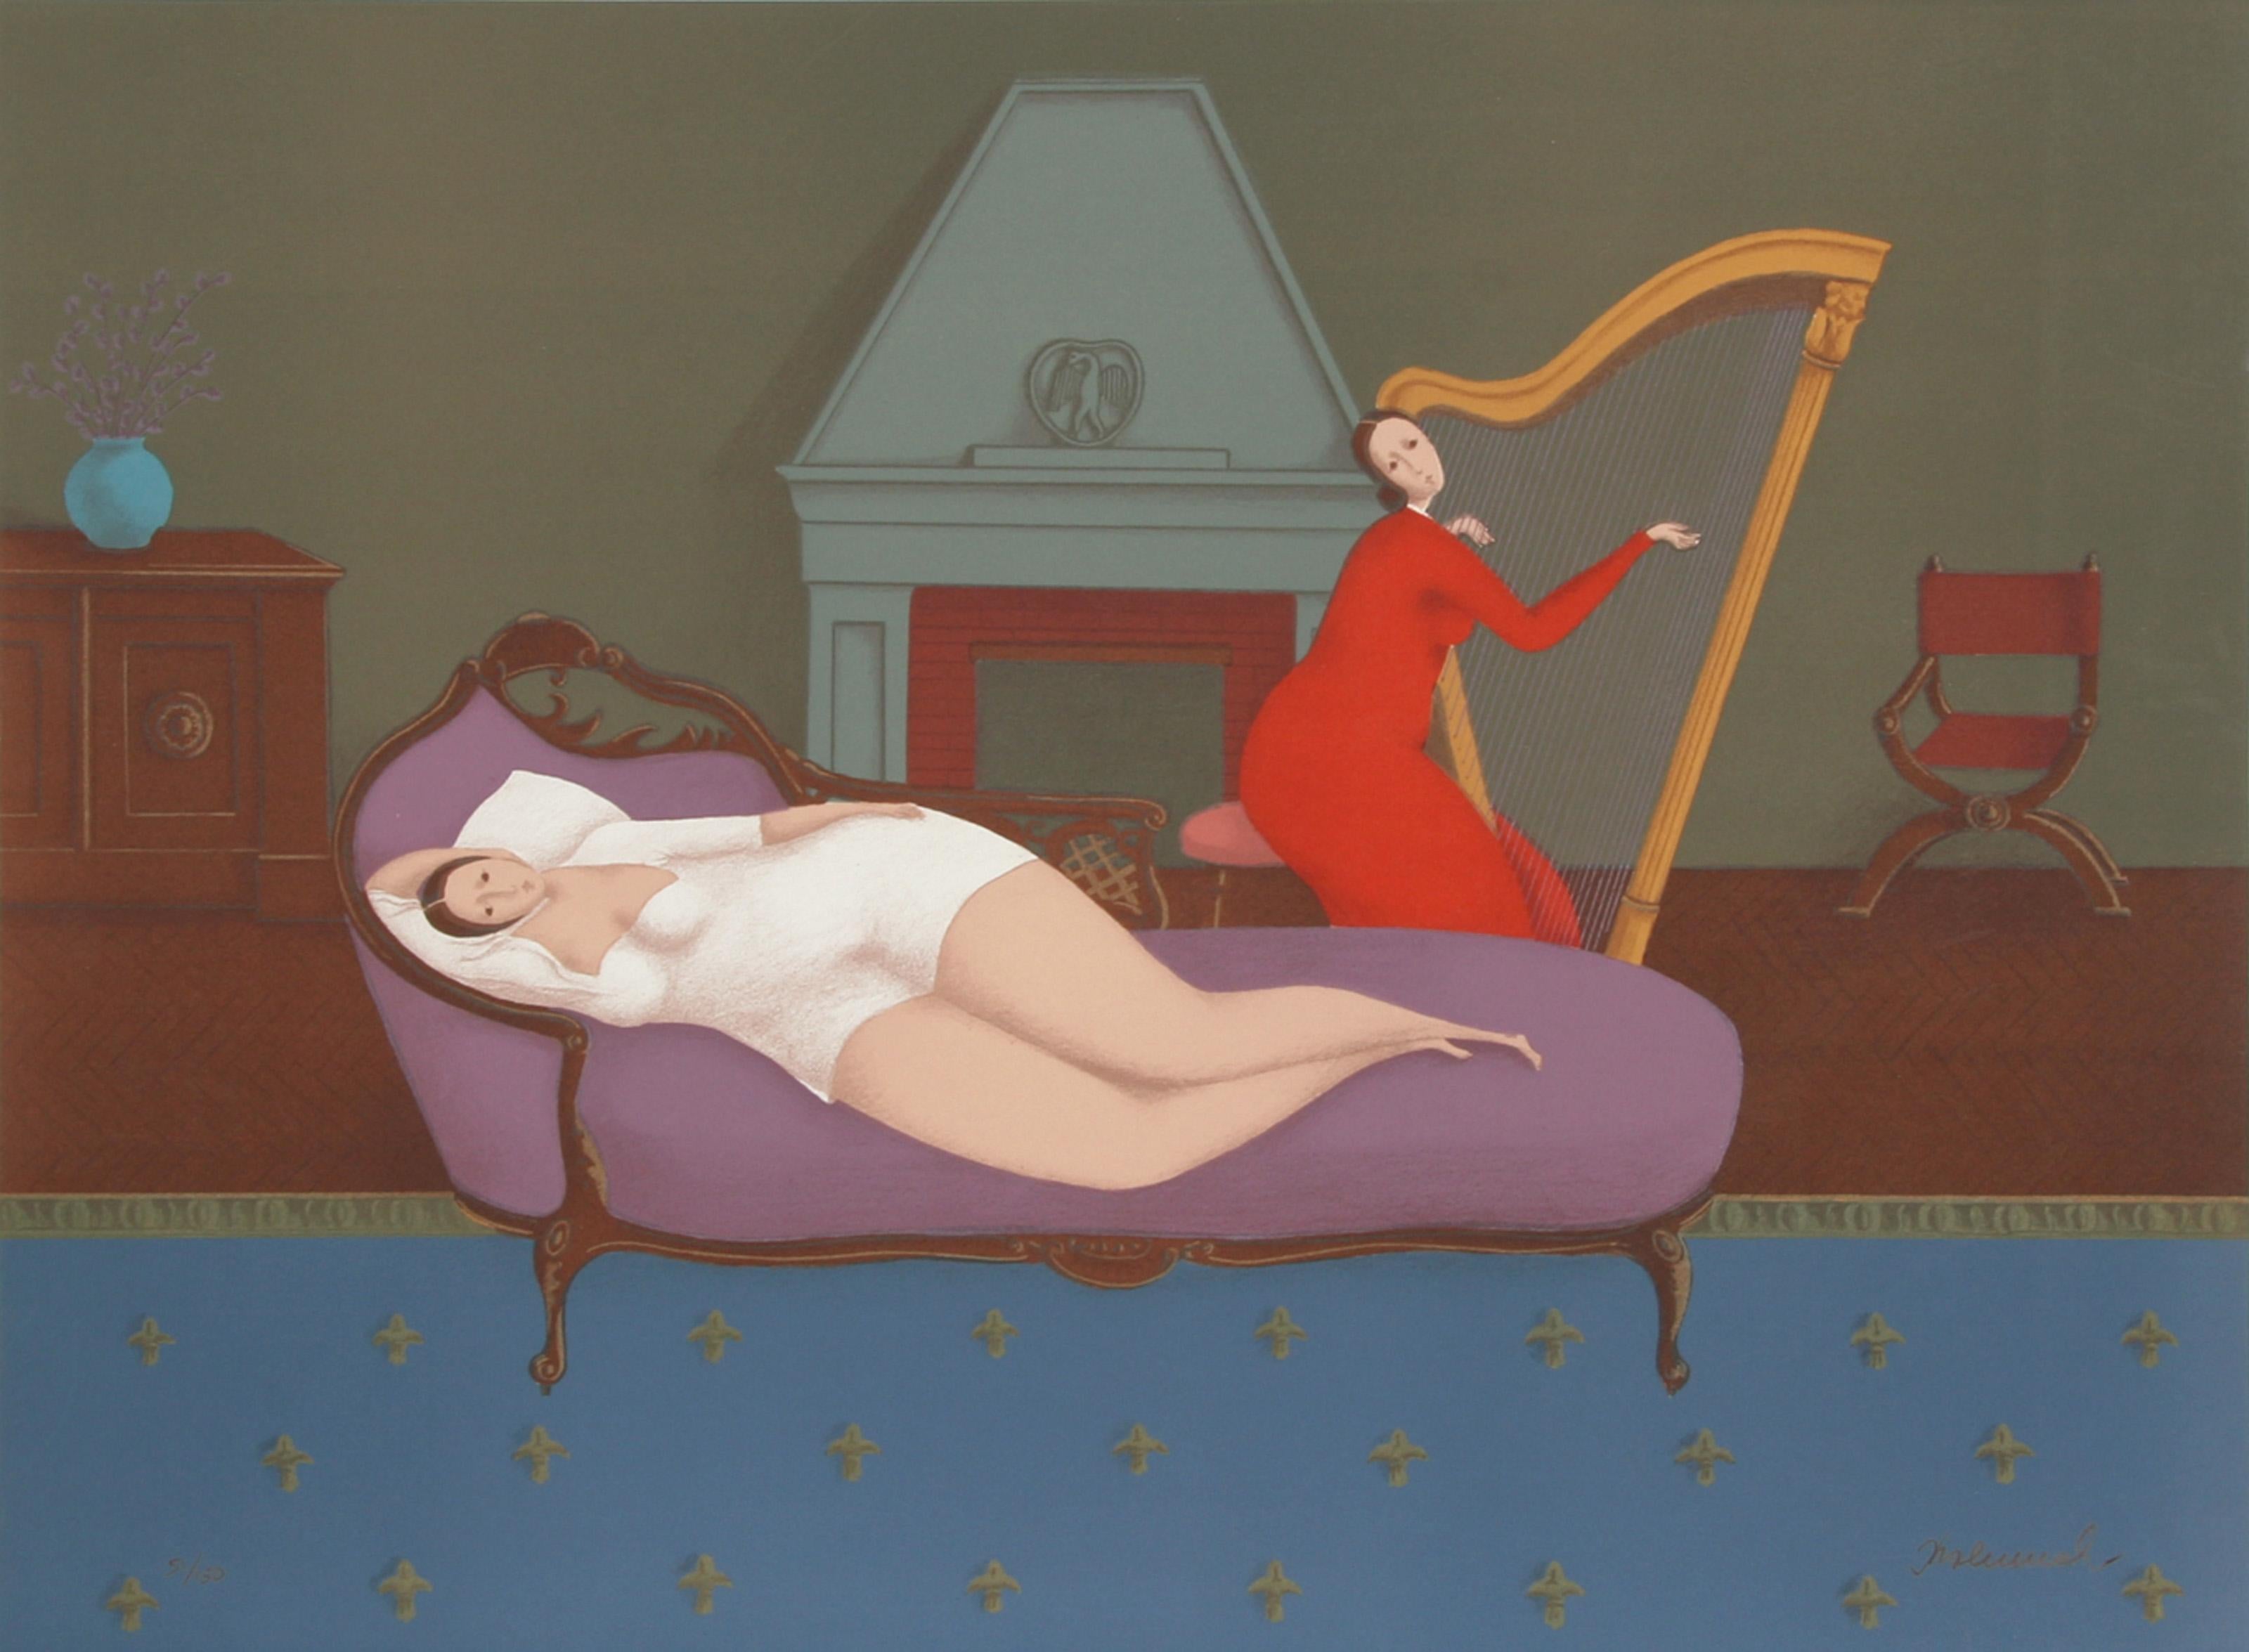 Branko Bahunek, Croatian (1935 - ) -  Lounging with Harp. Medium: Lithograph, signed and numbered in pencil, Edition: 150, Size: 21.5 in. x 29 in. (54.61 cm x 73.66 cm) 